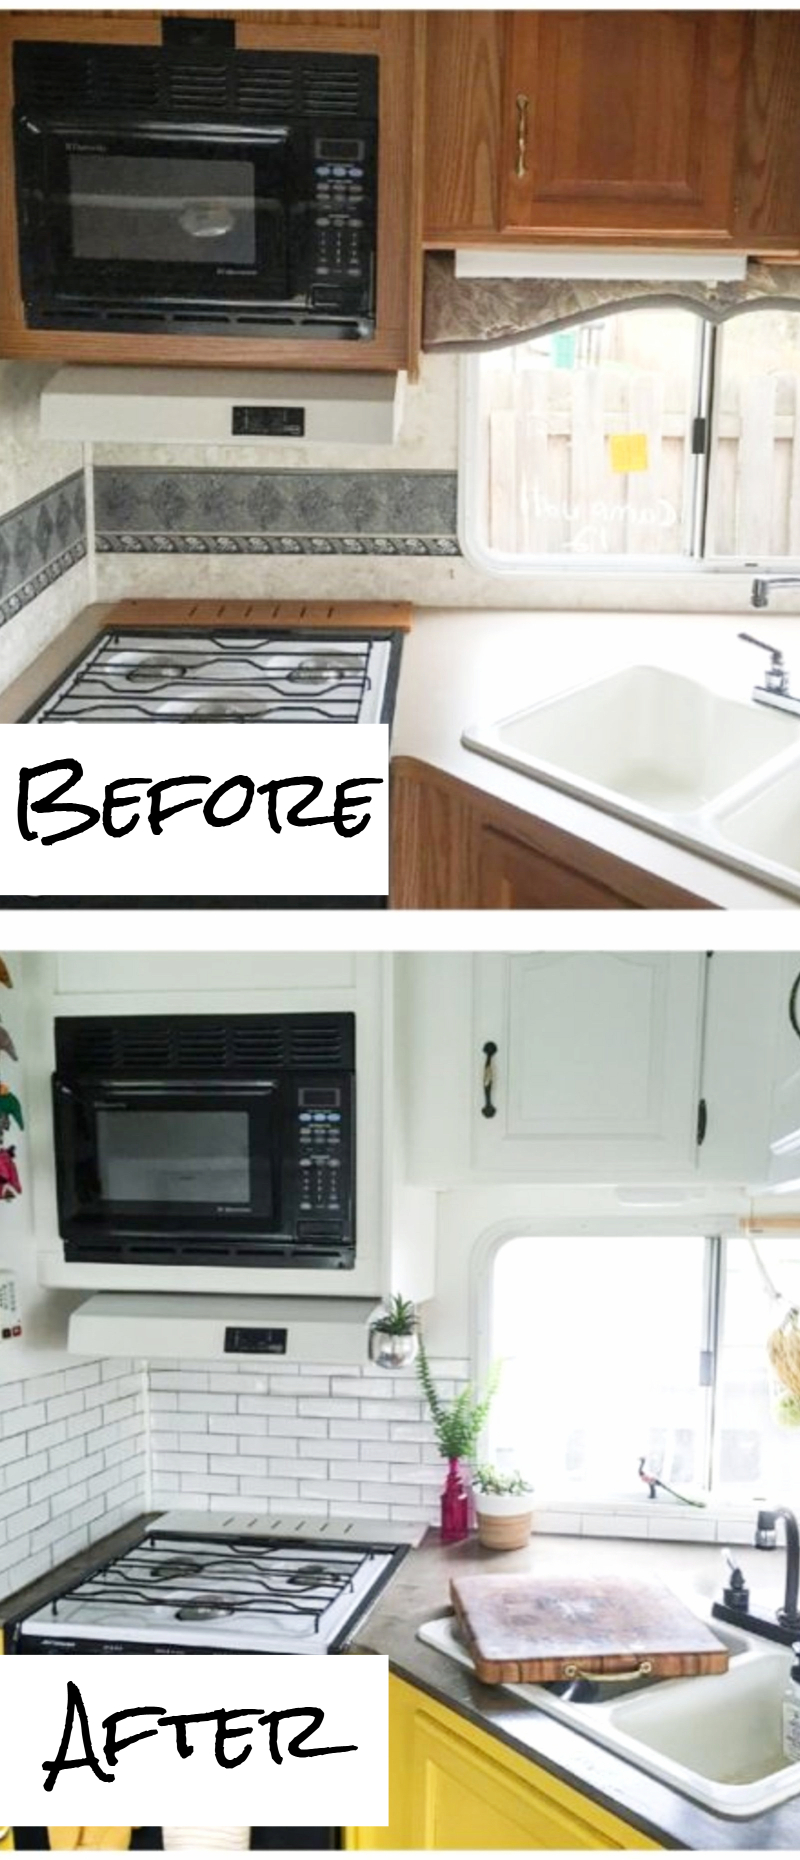 Small RV kitchen makeovers before and after - small kitchens remodel ideas and pictures #kitchenideas #farmhousedecor #kitchendecor #kitchenremodel #diyhomedecor #homedecorideas #farmhousekitchen